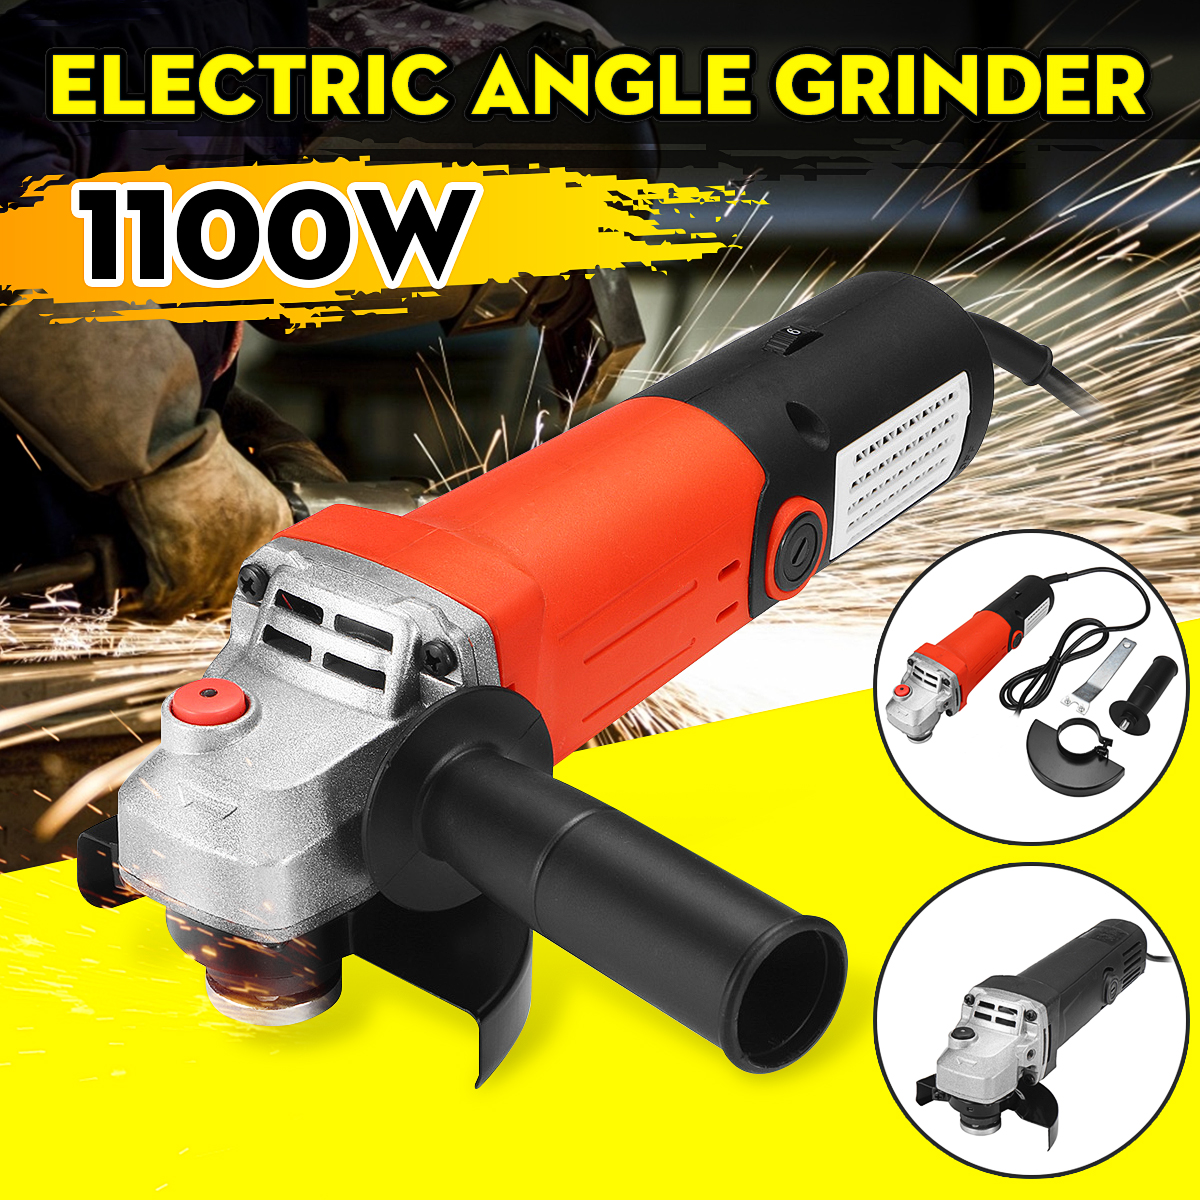 1100W-11000rmin-Electric-Angle-Grinder-Grinding-Machine-Woodworking-Tool-1824584-1